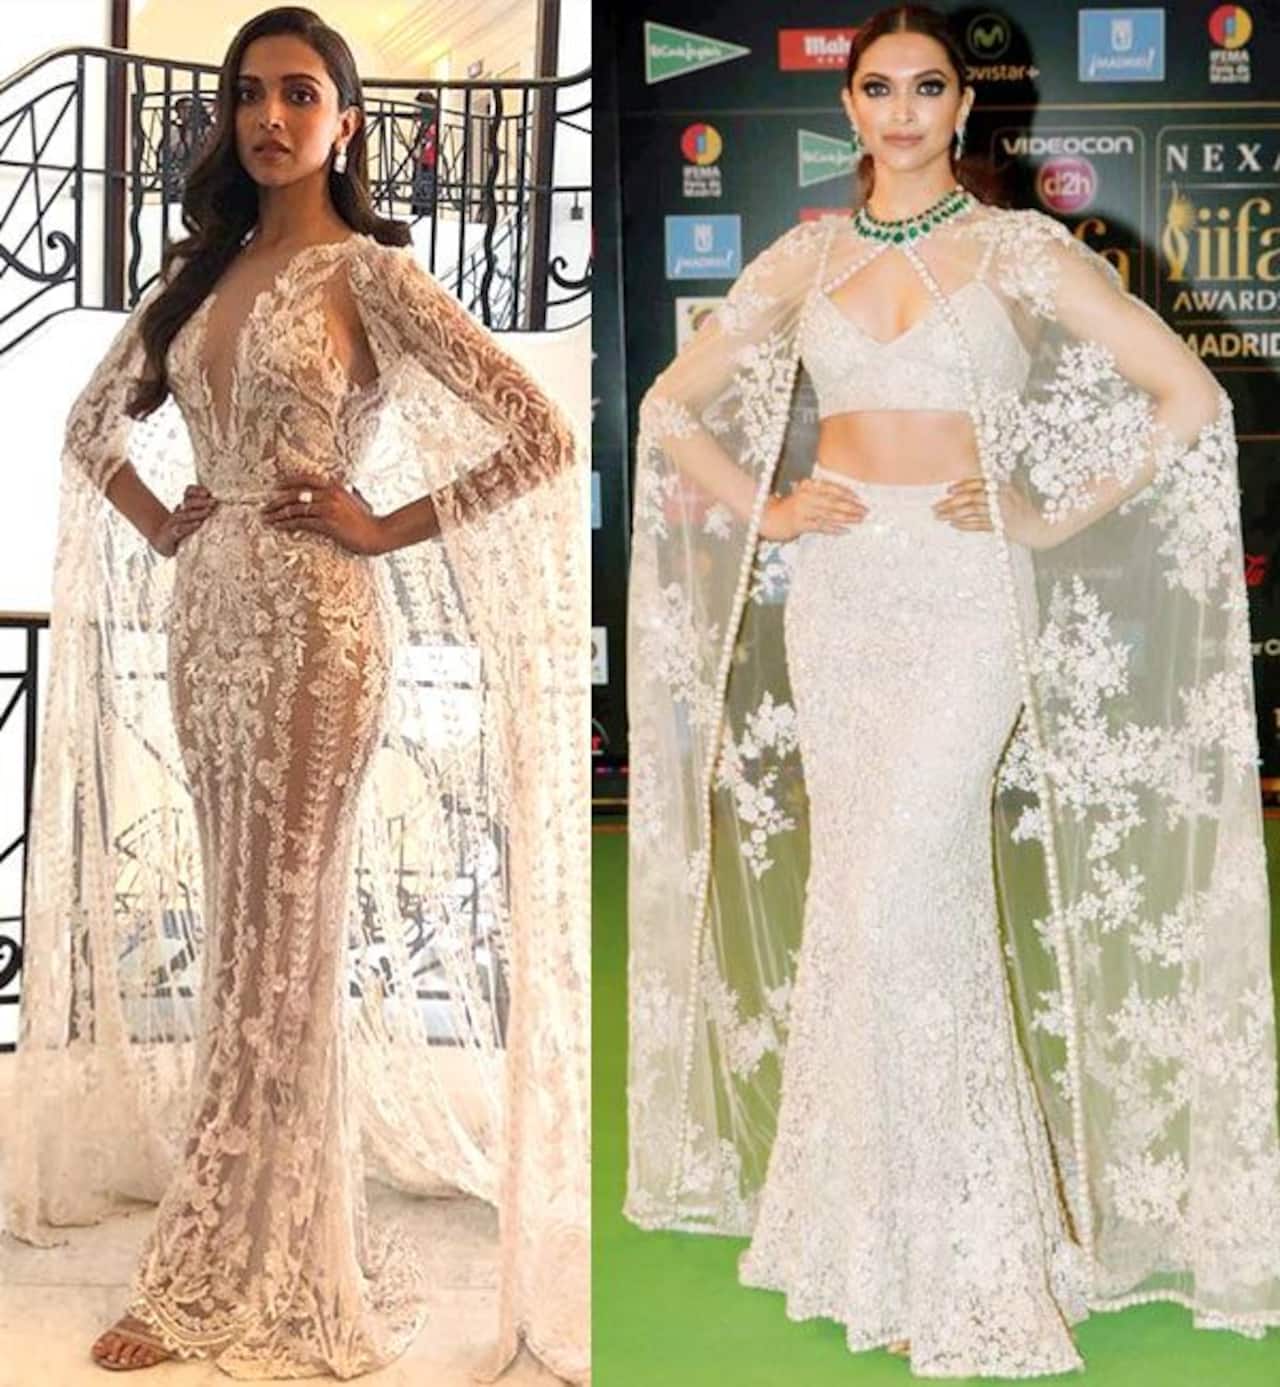 Cannes 2018: Deepika Padukone's fascination for long capes goes back a long way